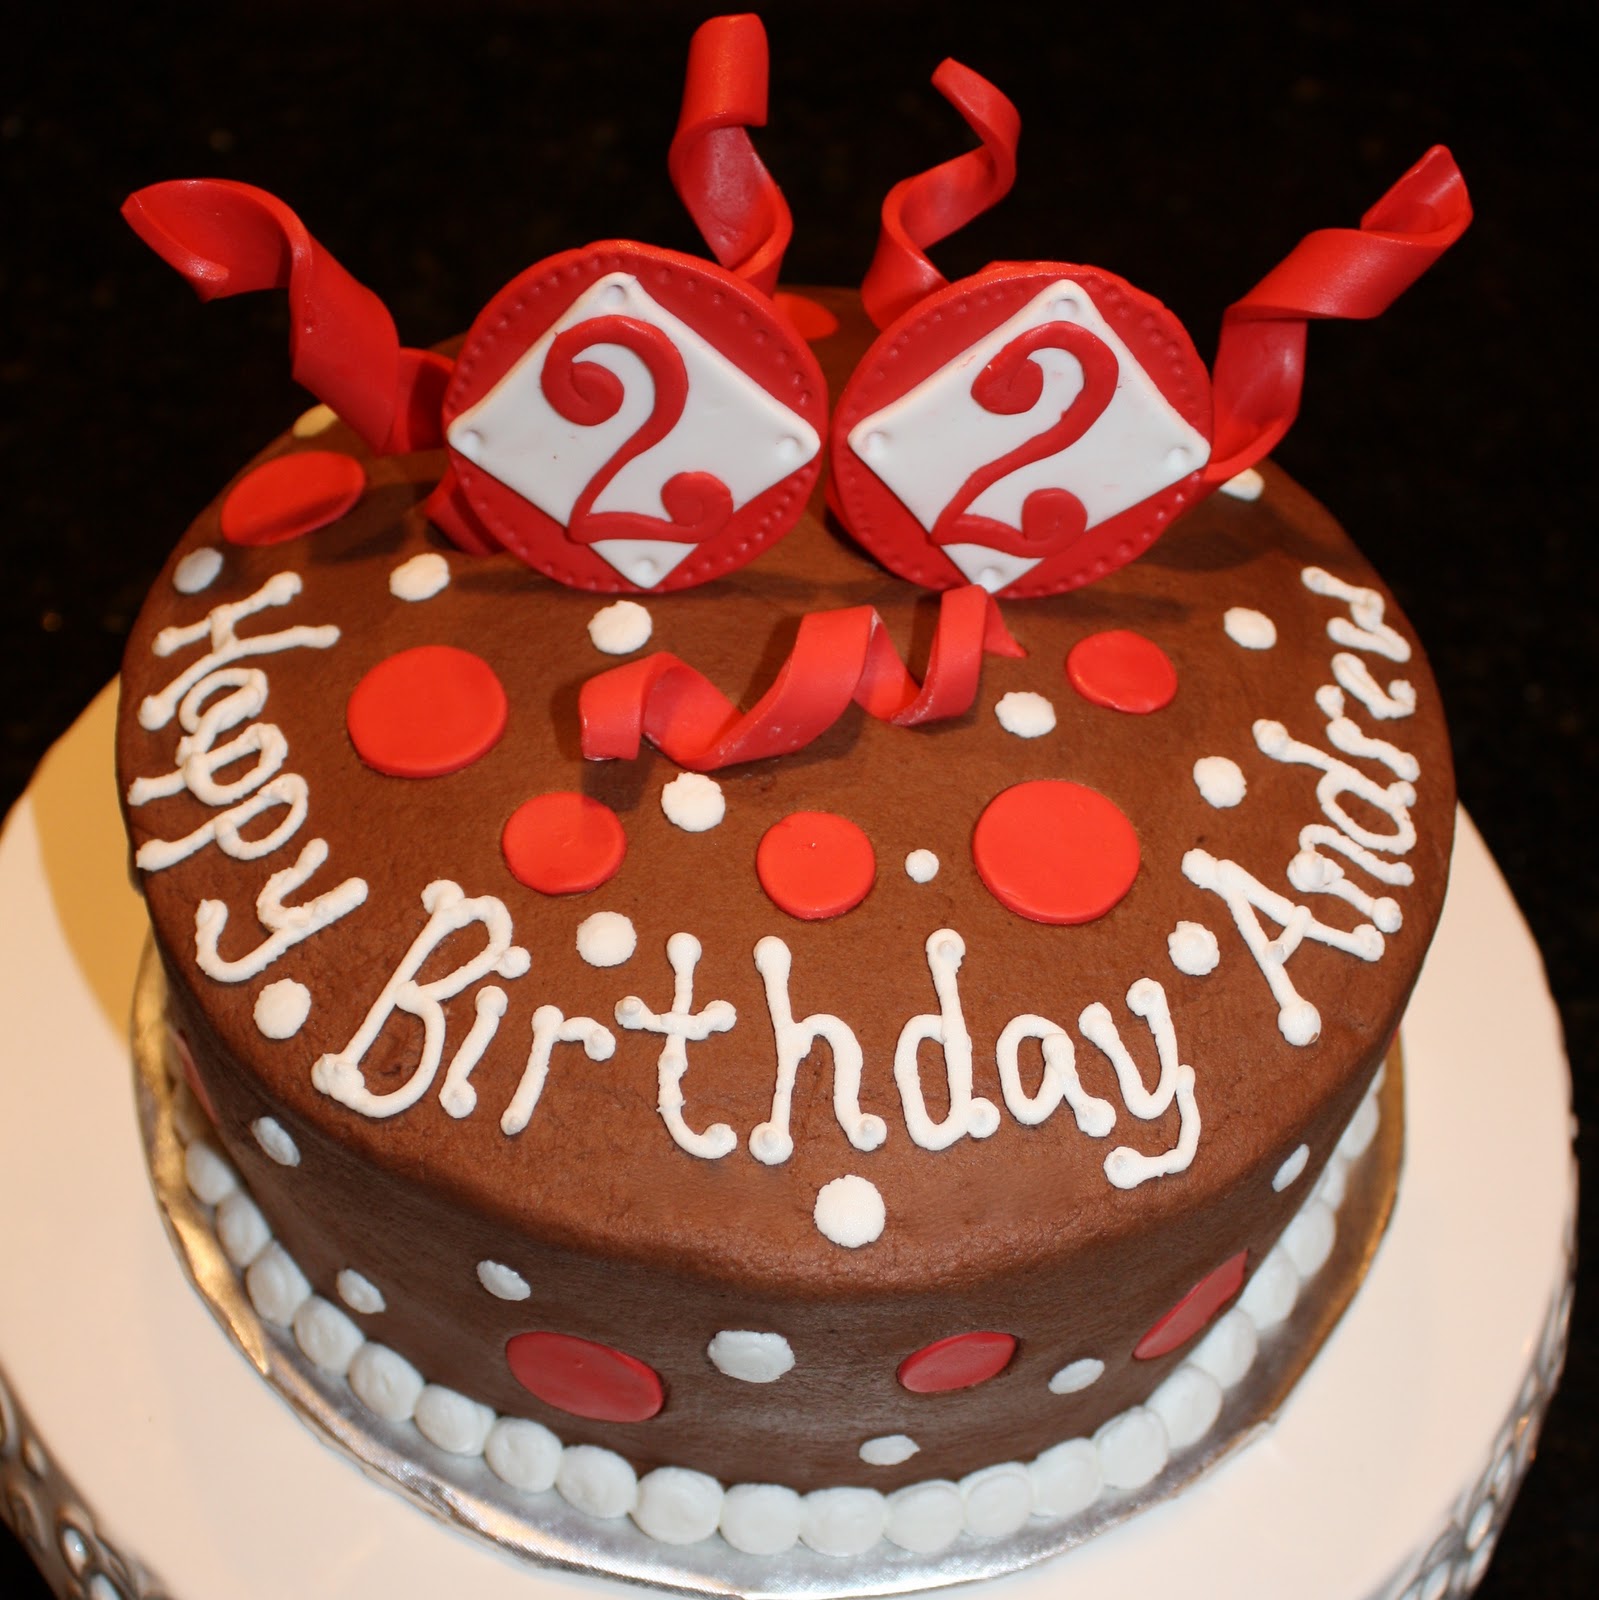 20 Of the Best Ideas for 22nd Birthday Cake Home, Family, Style and